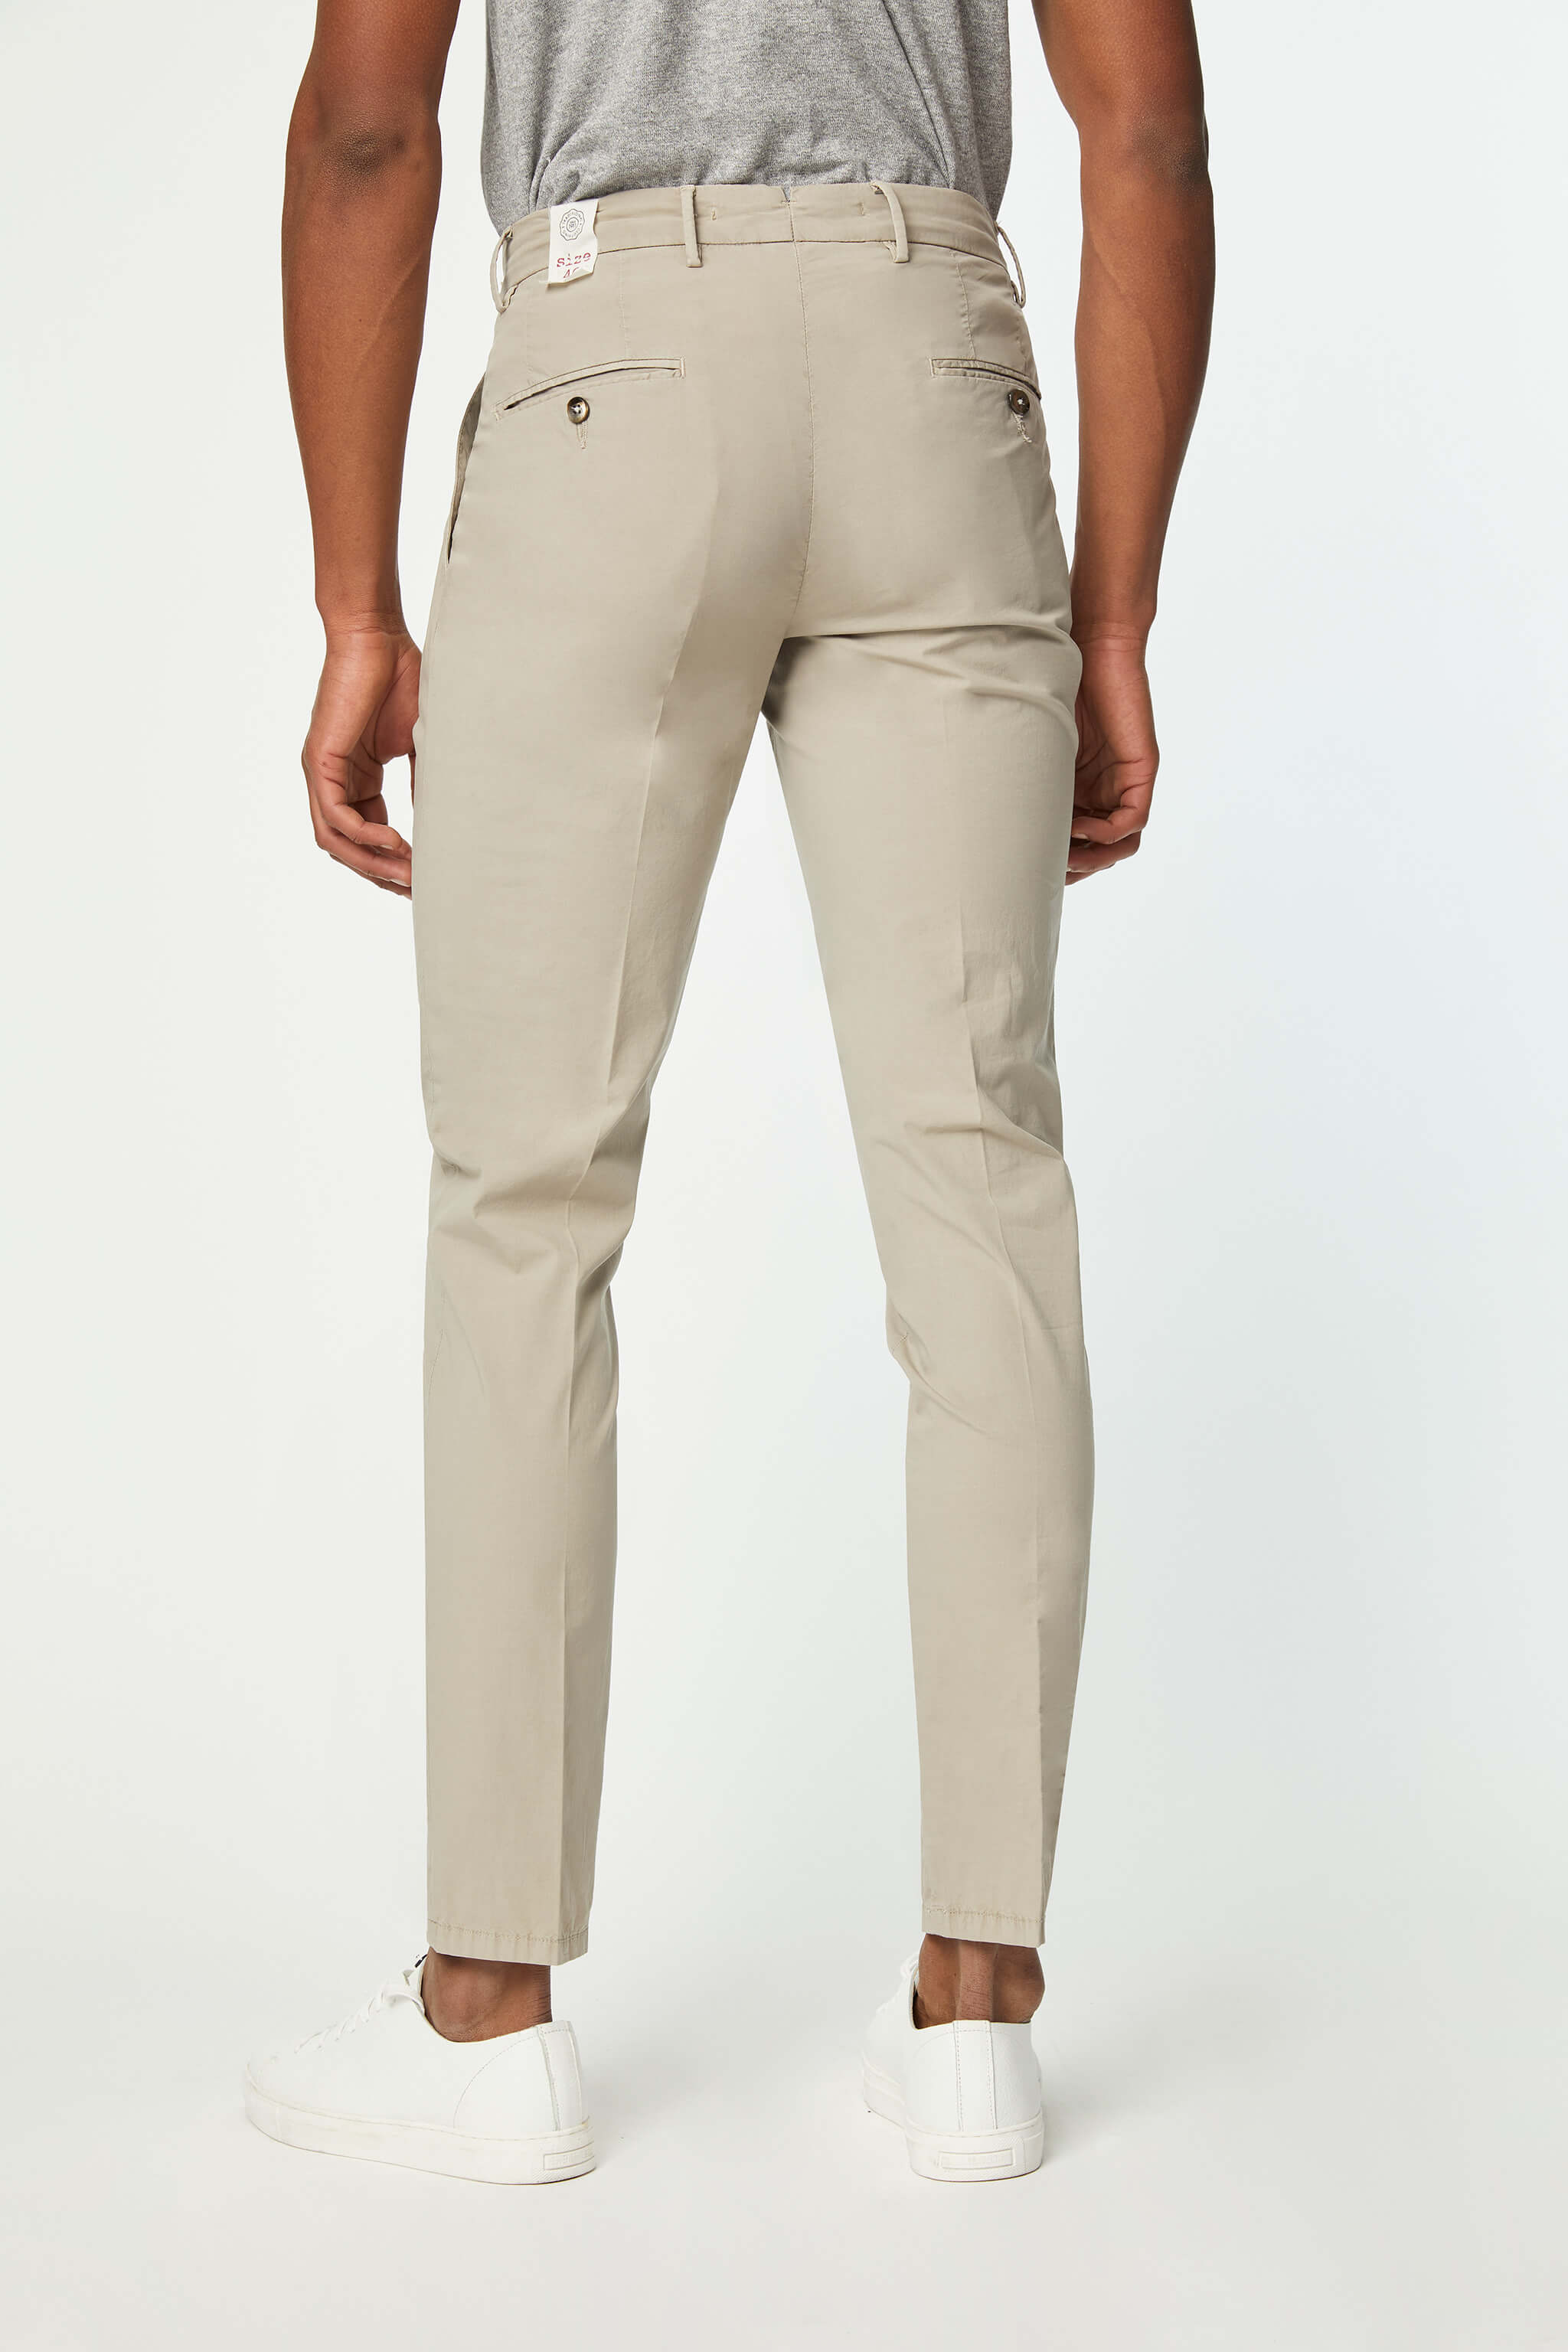 Garment-dyed MUDDY pants in Beige